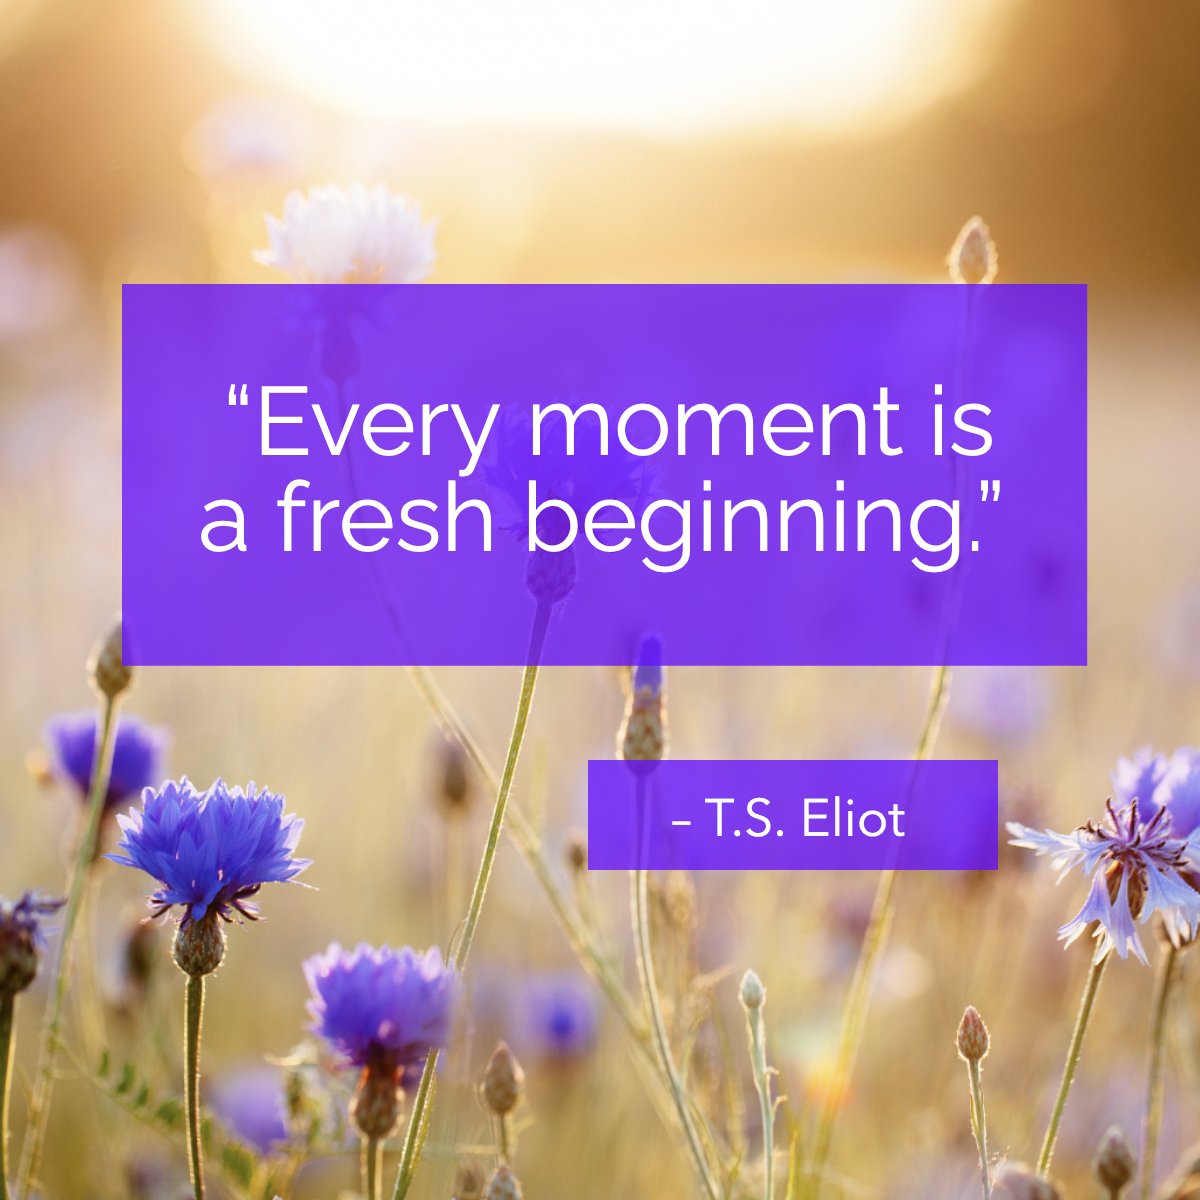 Thomas Stearns Eliot OM was a poet, essayist, publisher, playwright, literary critic, and editor.

Considered one of the 20th century's major poets 

#tseliot    #beginnings    #inspiring    #inspirational    #quote
#wearemvp #mvprealty #iloverealestate #realtor